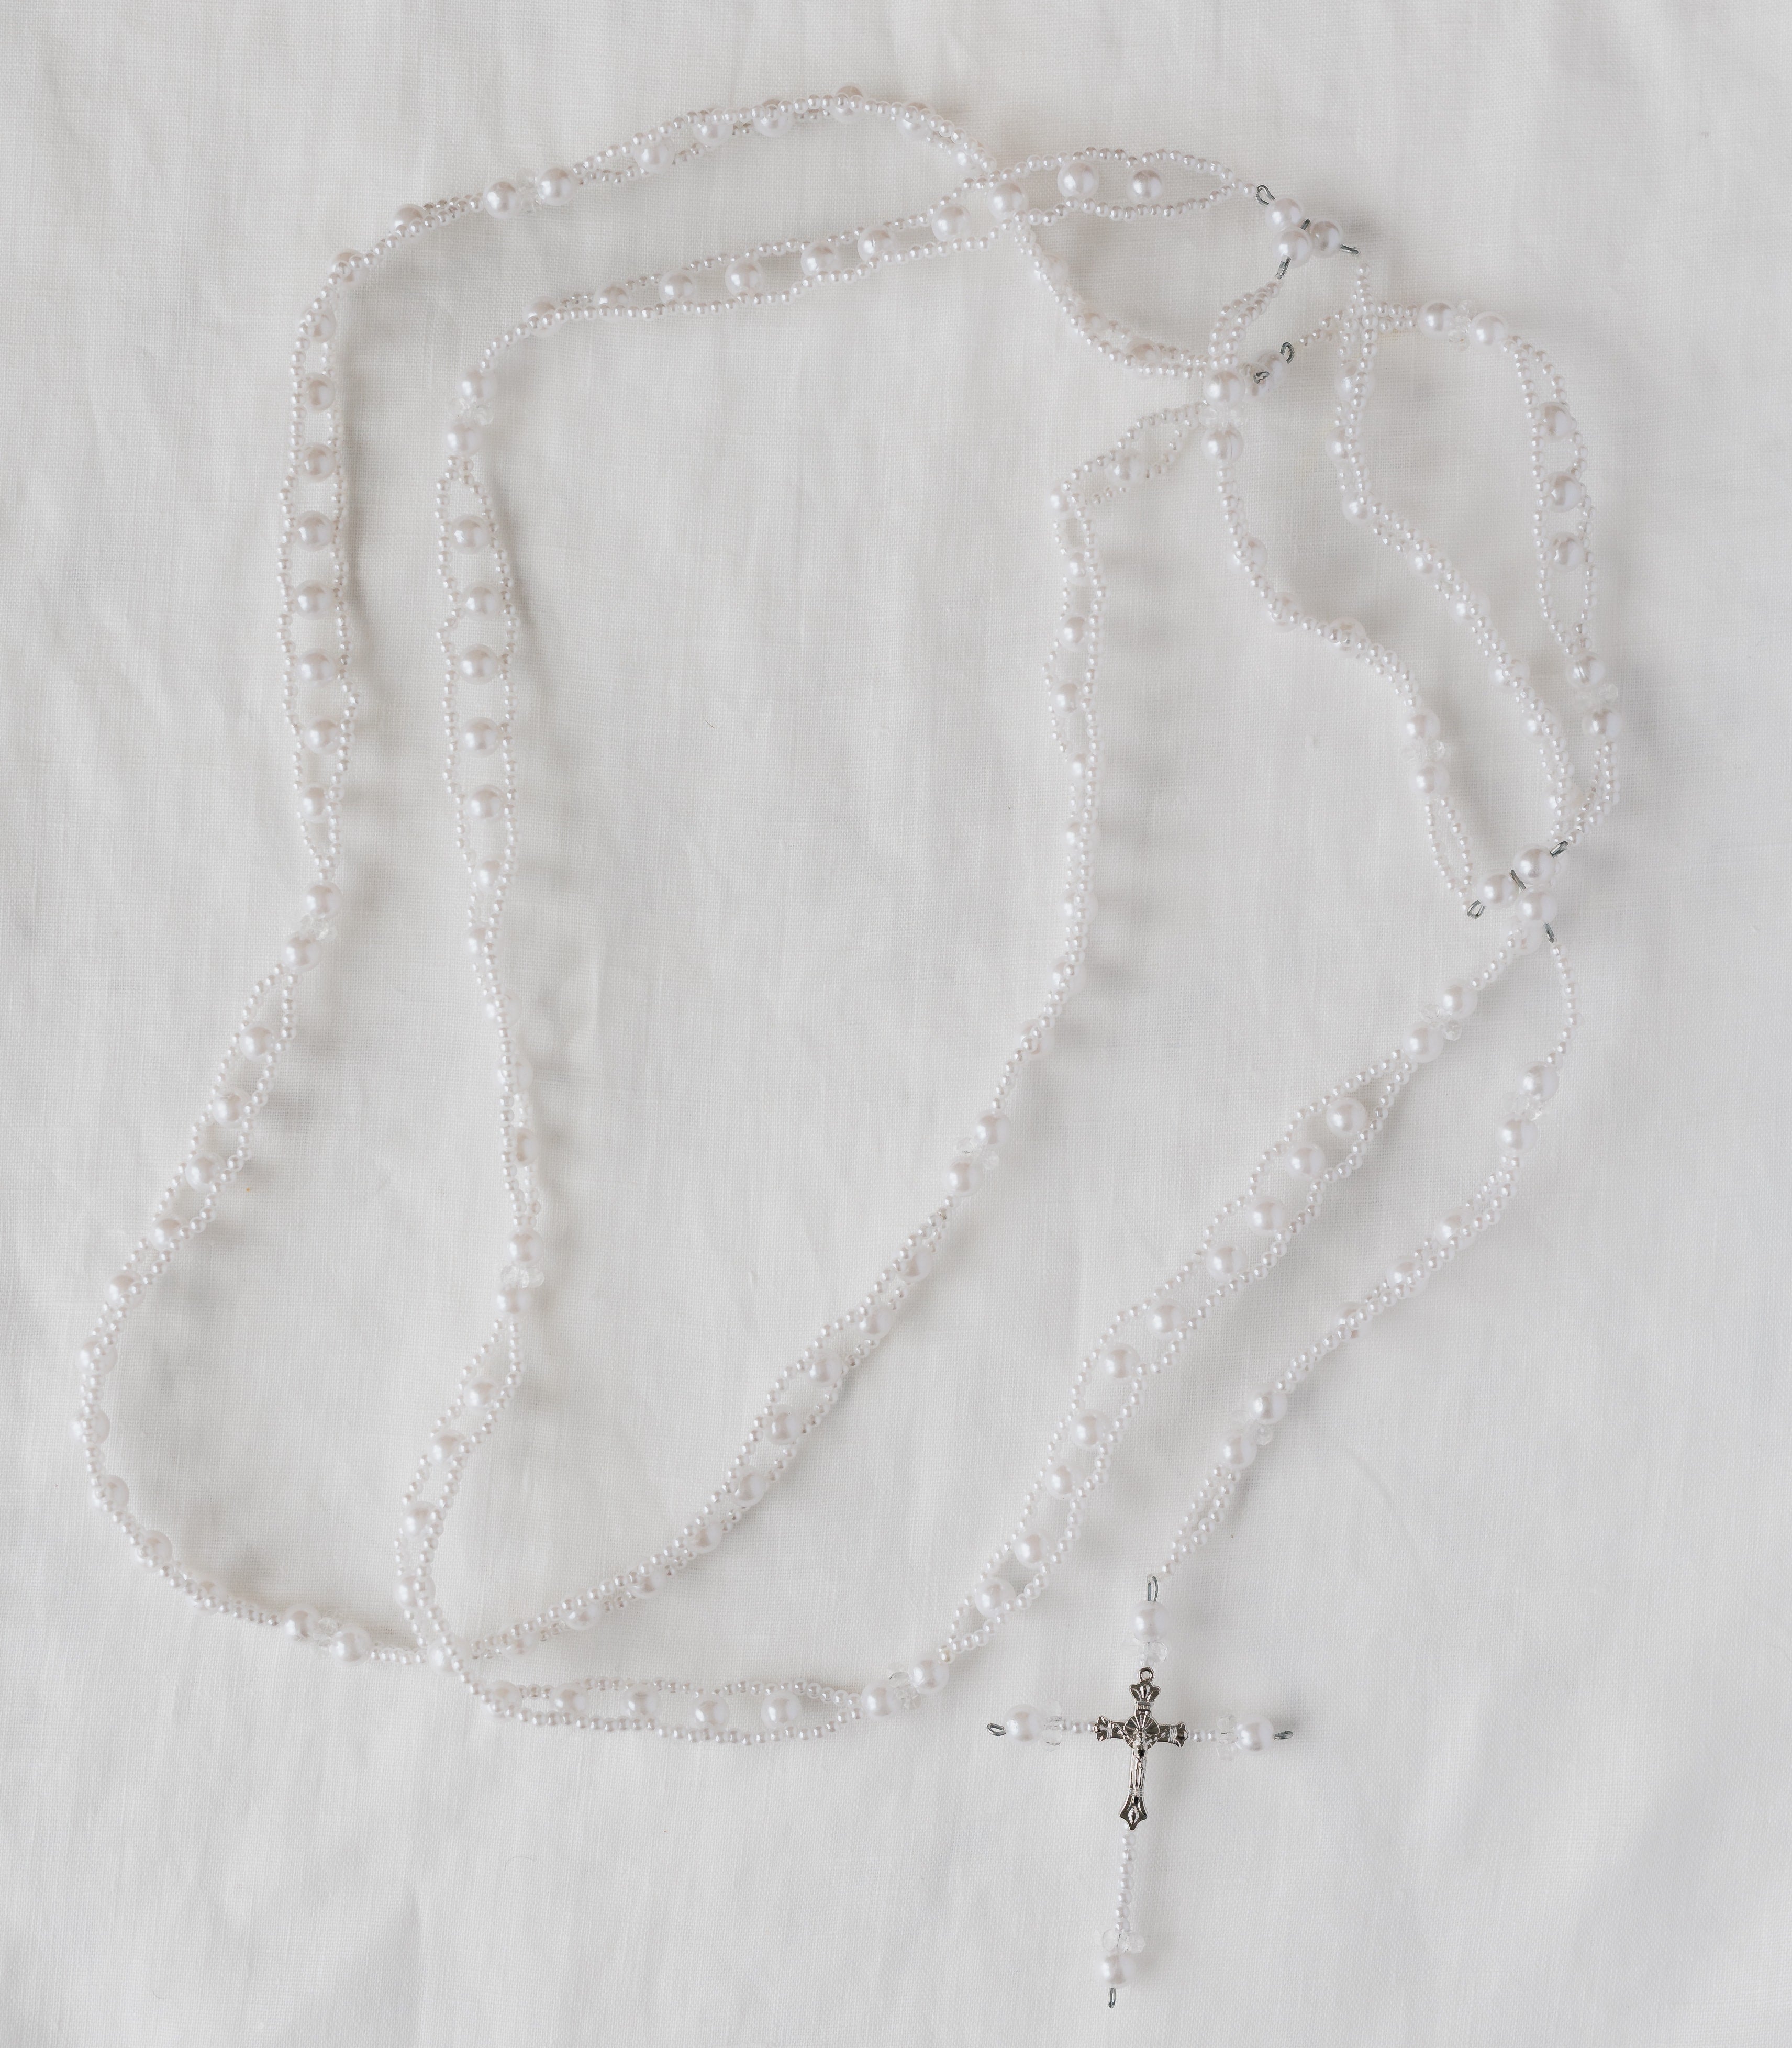 Double Layered Wedding Unity Cord with Rosary - White - Wedding Library